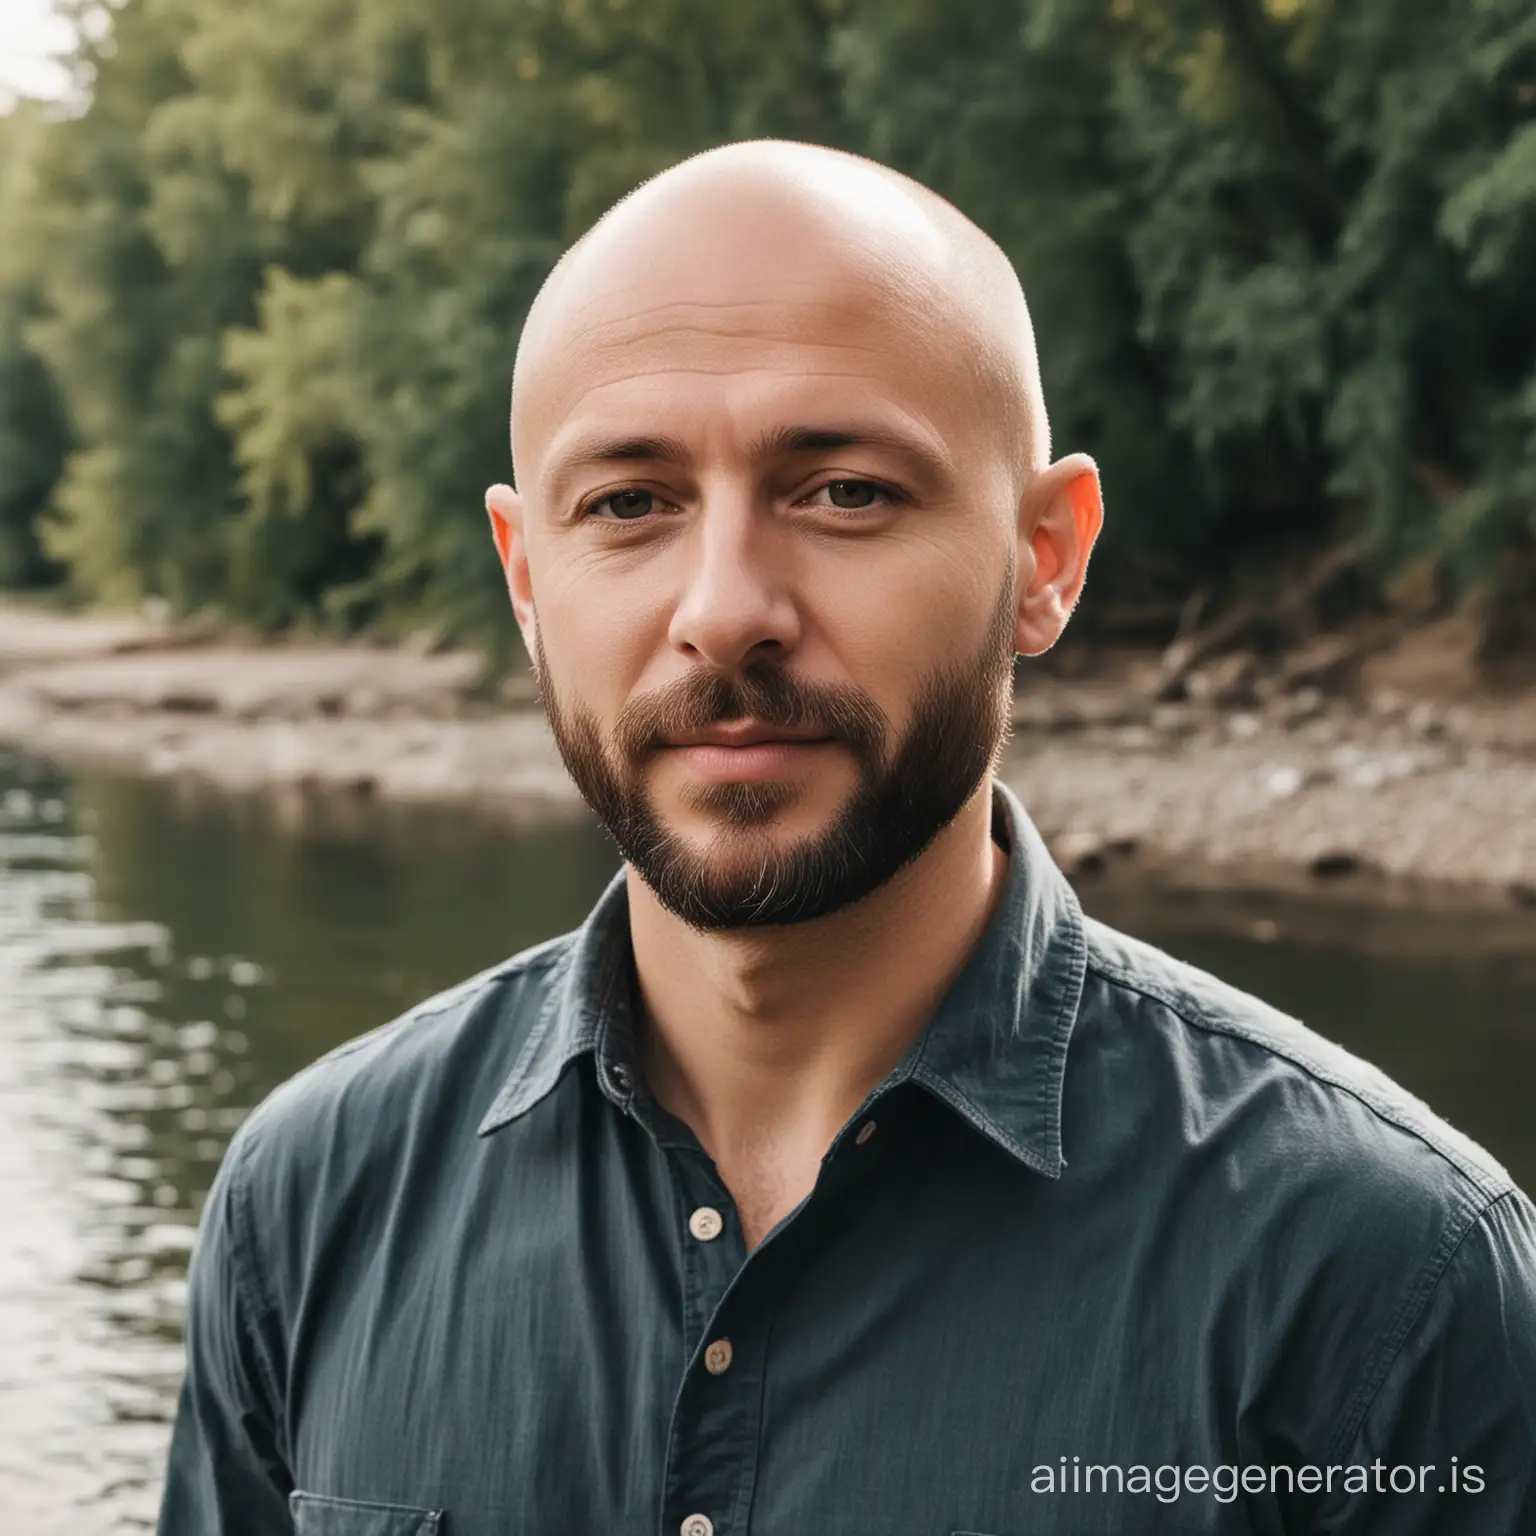 Bald man with short beard standing by the river